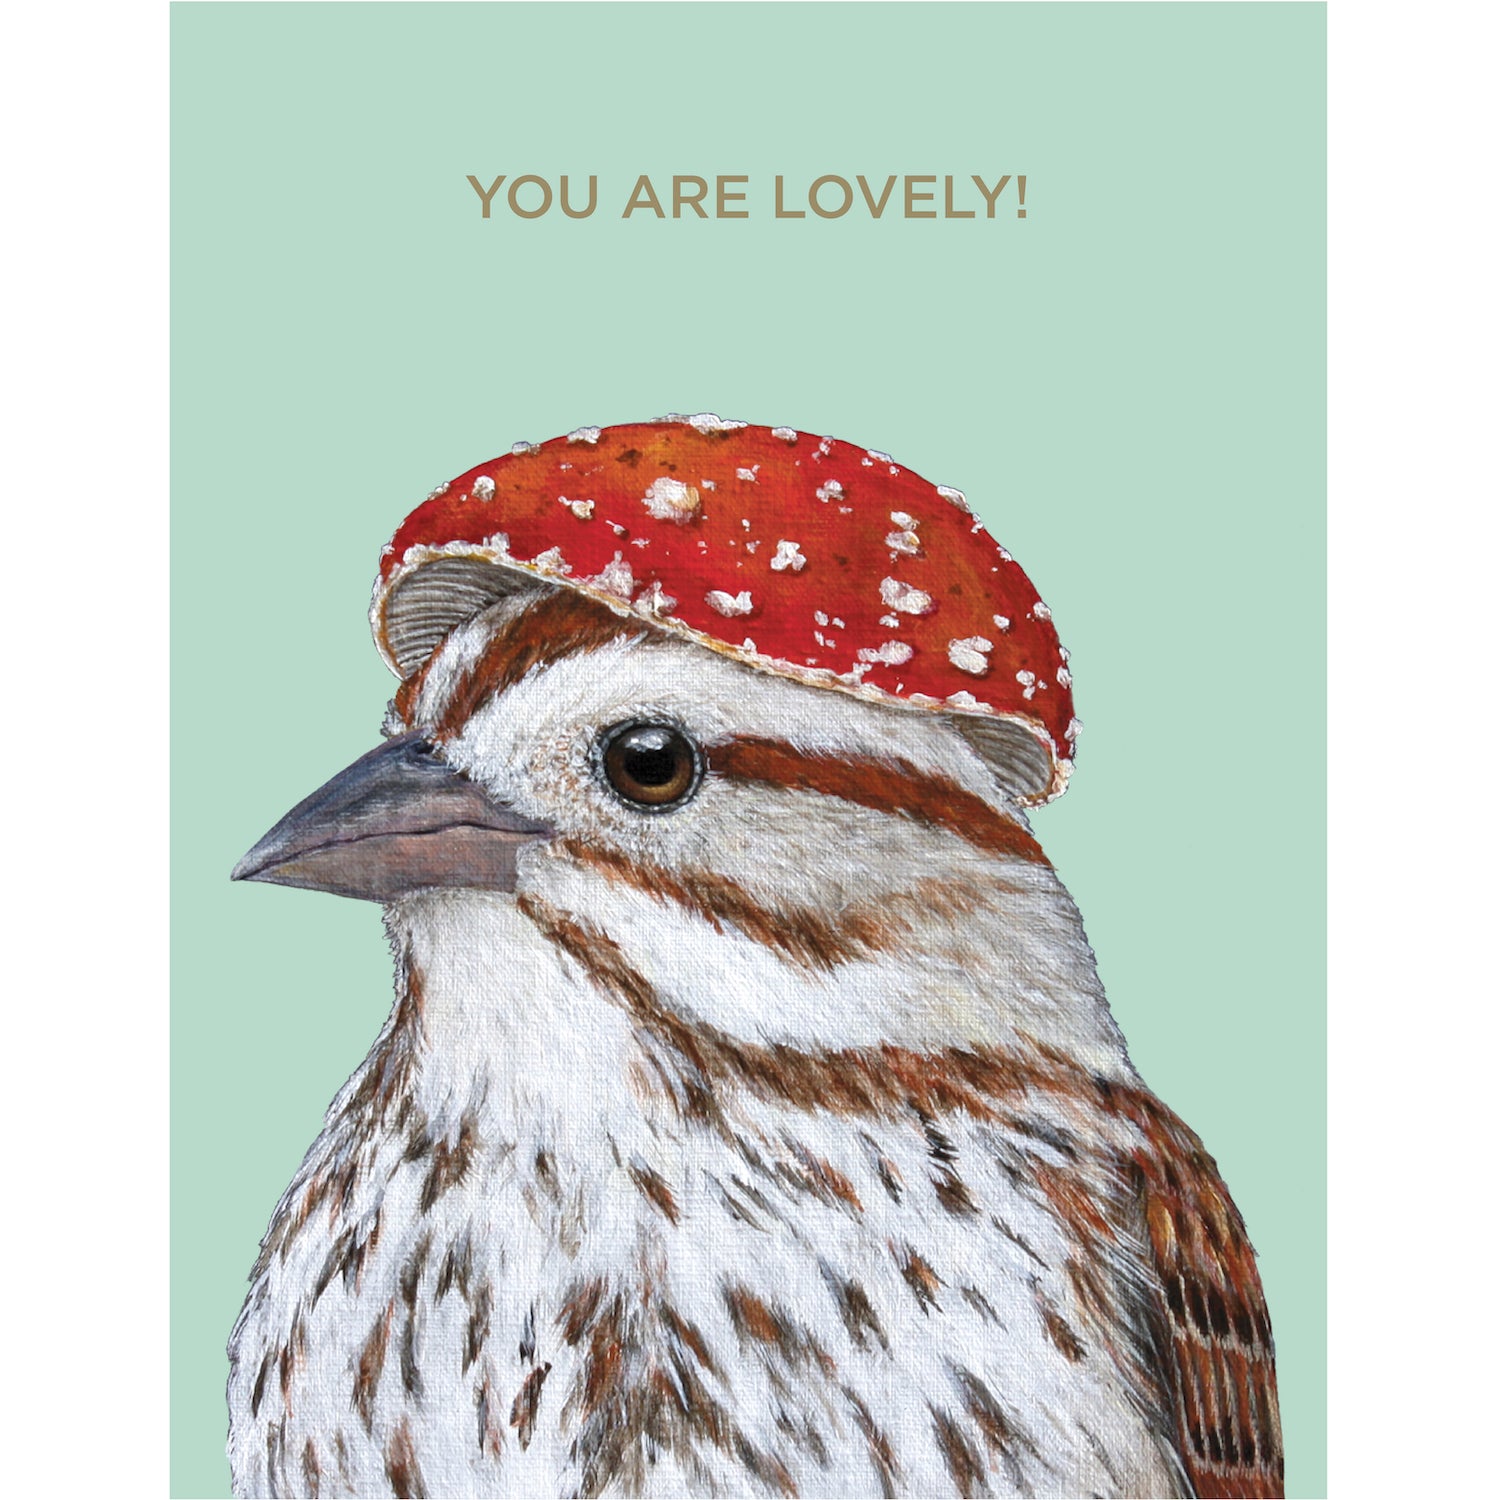 A lovely Hester &amp; Cook Sparrow card with artwork featuring a bird wearing a mushroom hat, enhanced with gold foil accents.